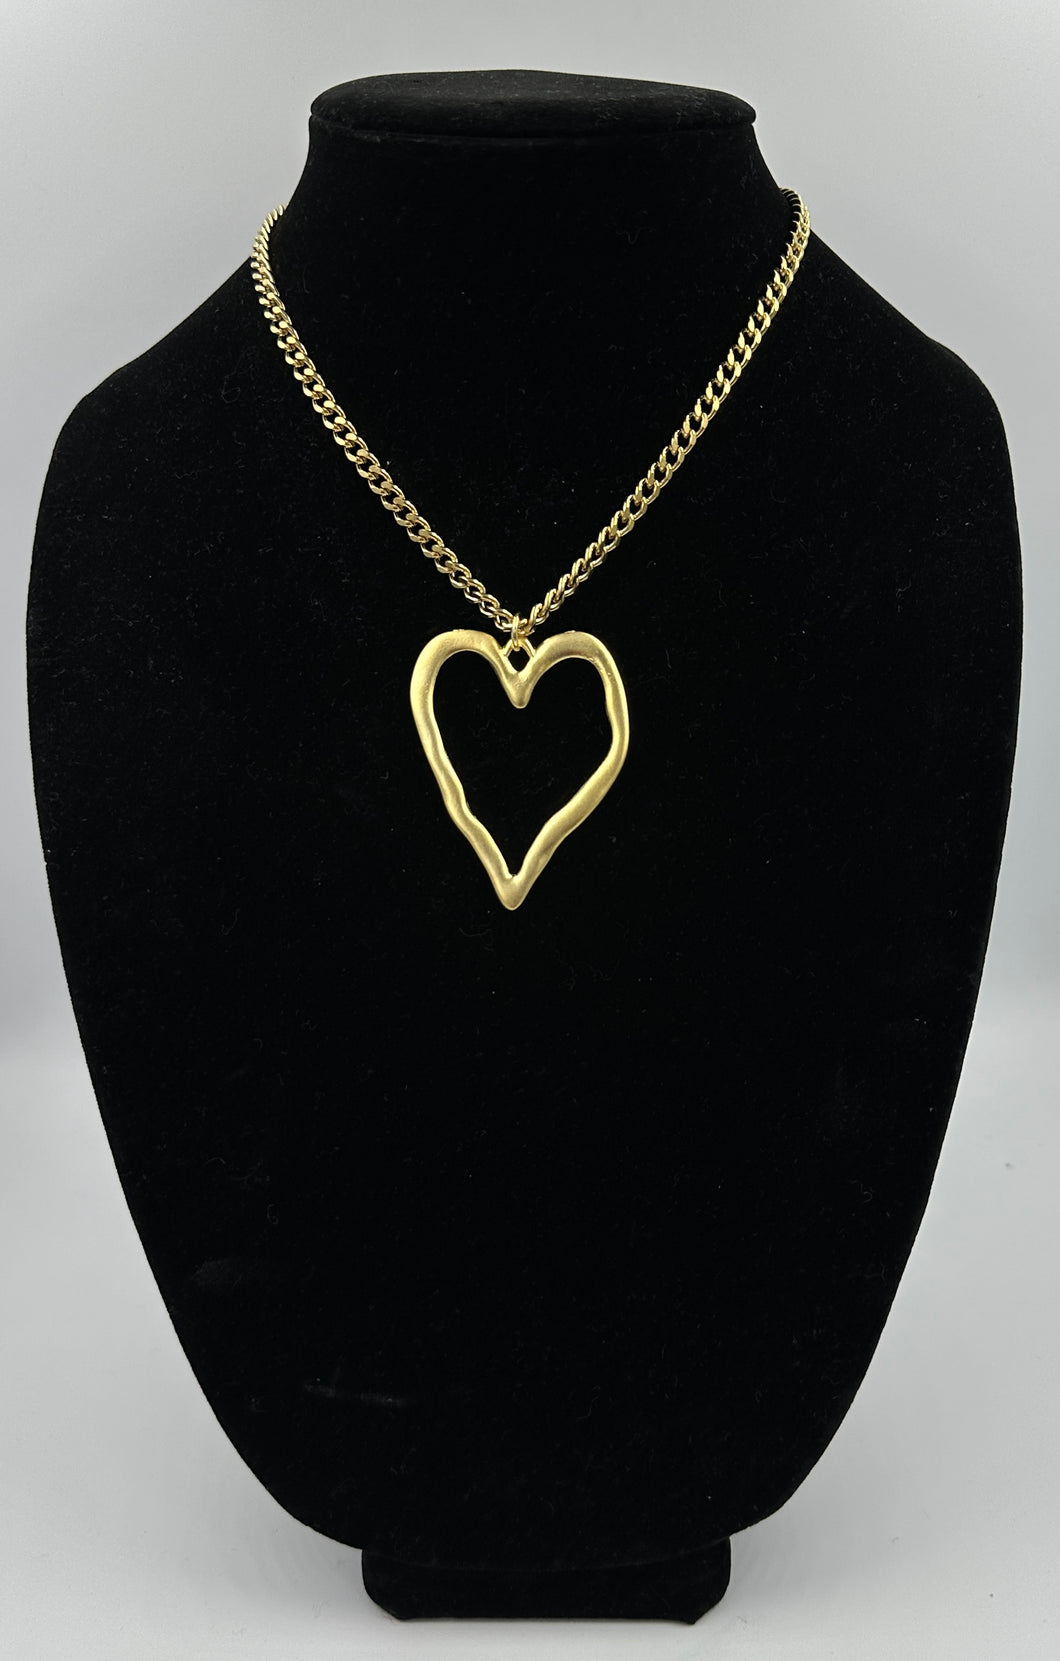 Tracey's Big Heart Necklace